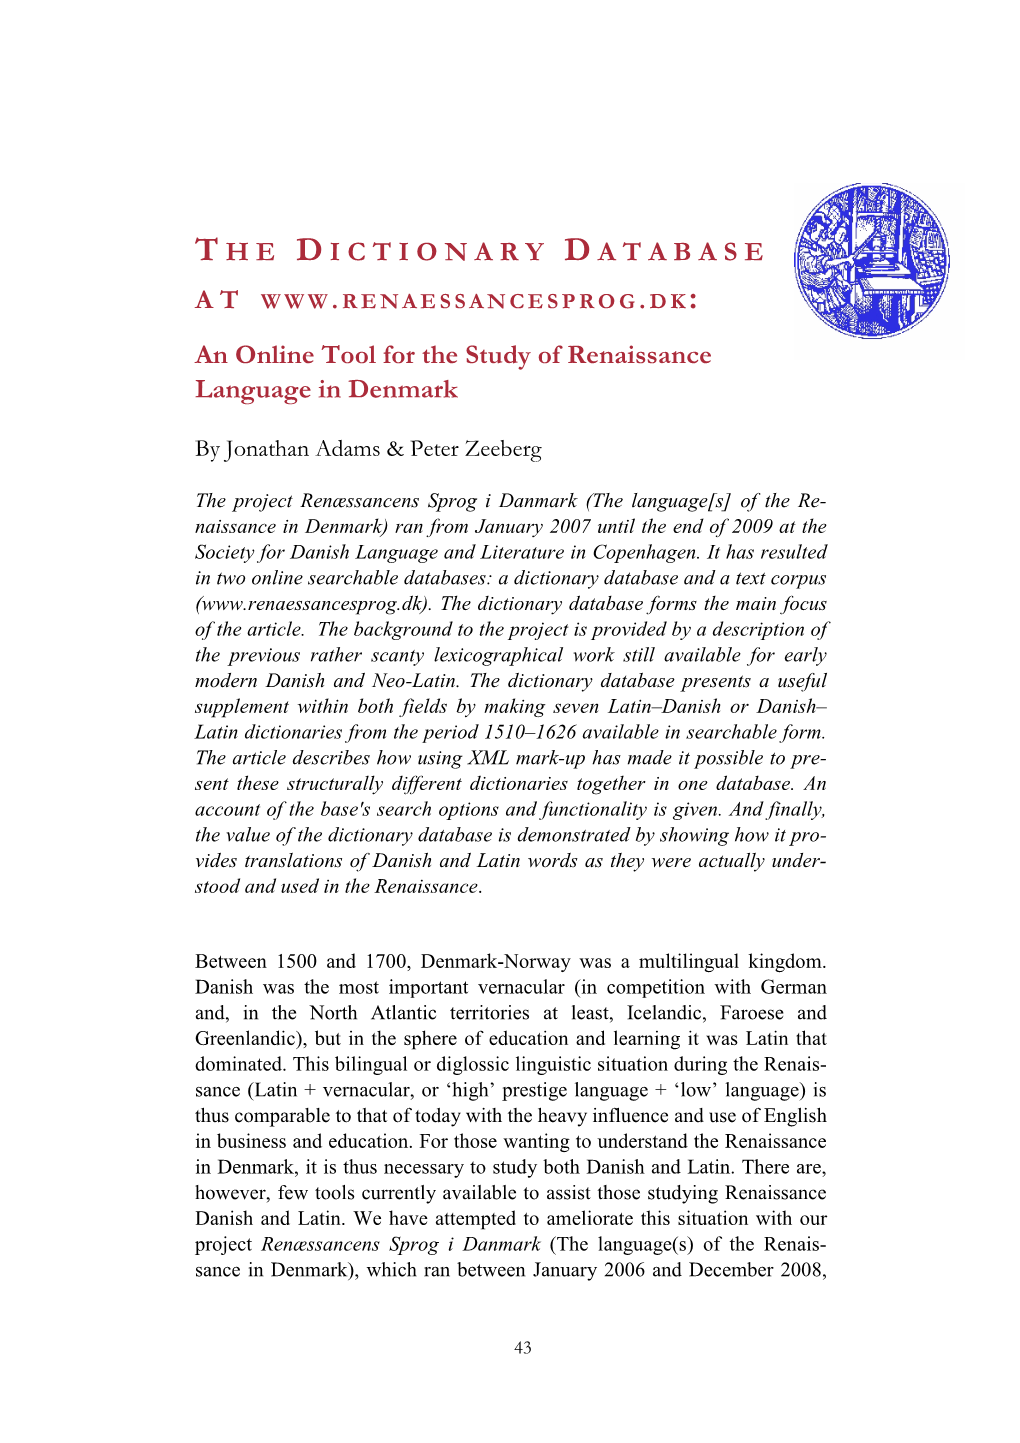 The Dictionary Database At